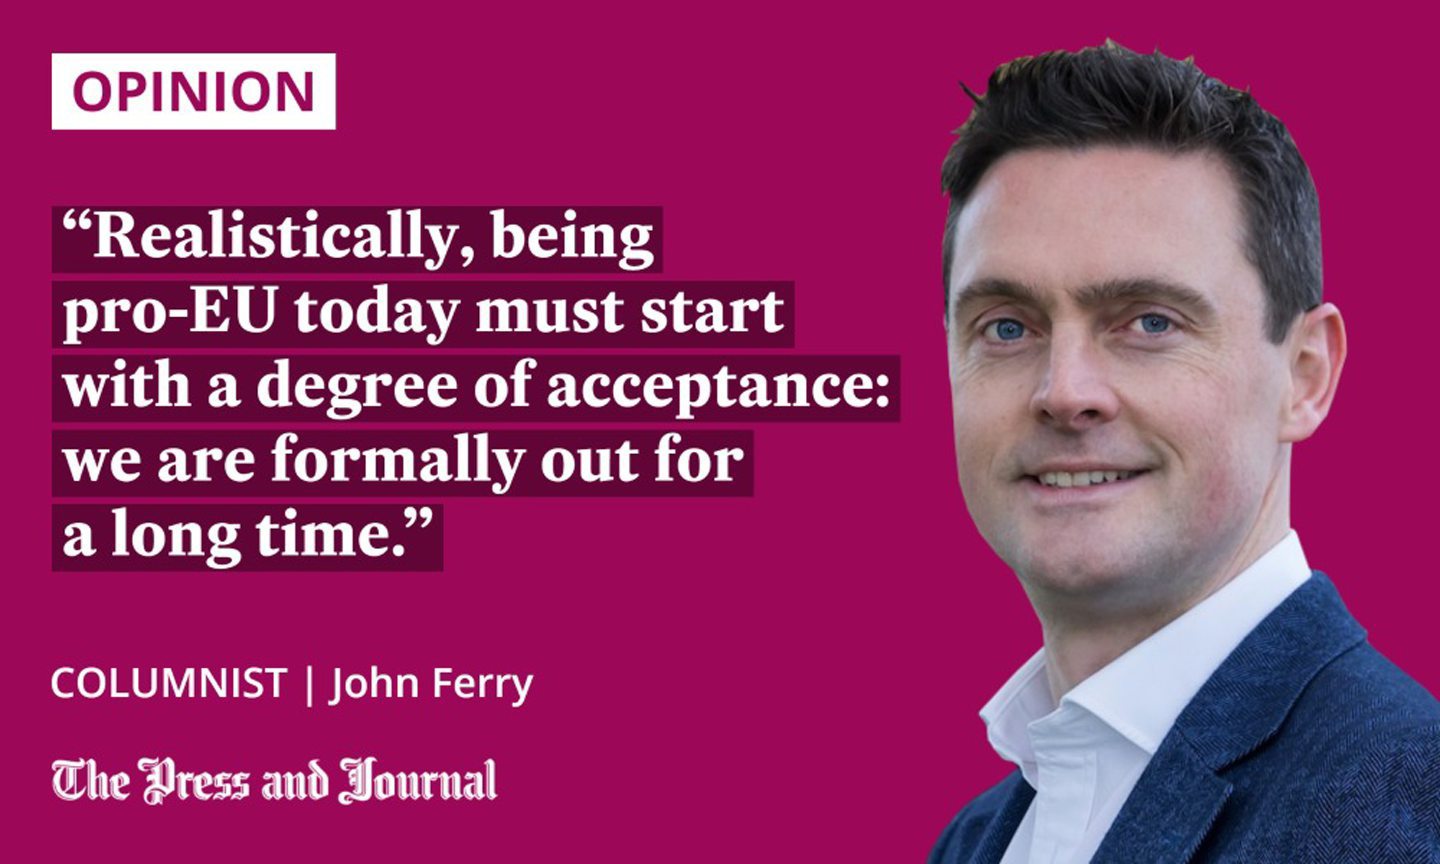 Quotation from columnist John Ferry regarding UK rejoining the EU: "Realistically, being pro-EU today must start with a degree of acceptance: we are formally out for a long time."